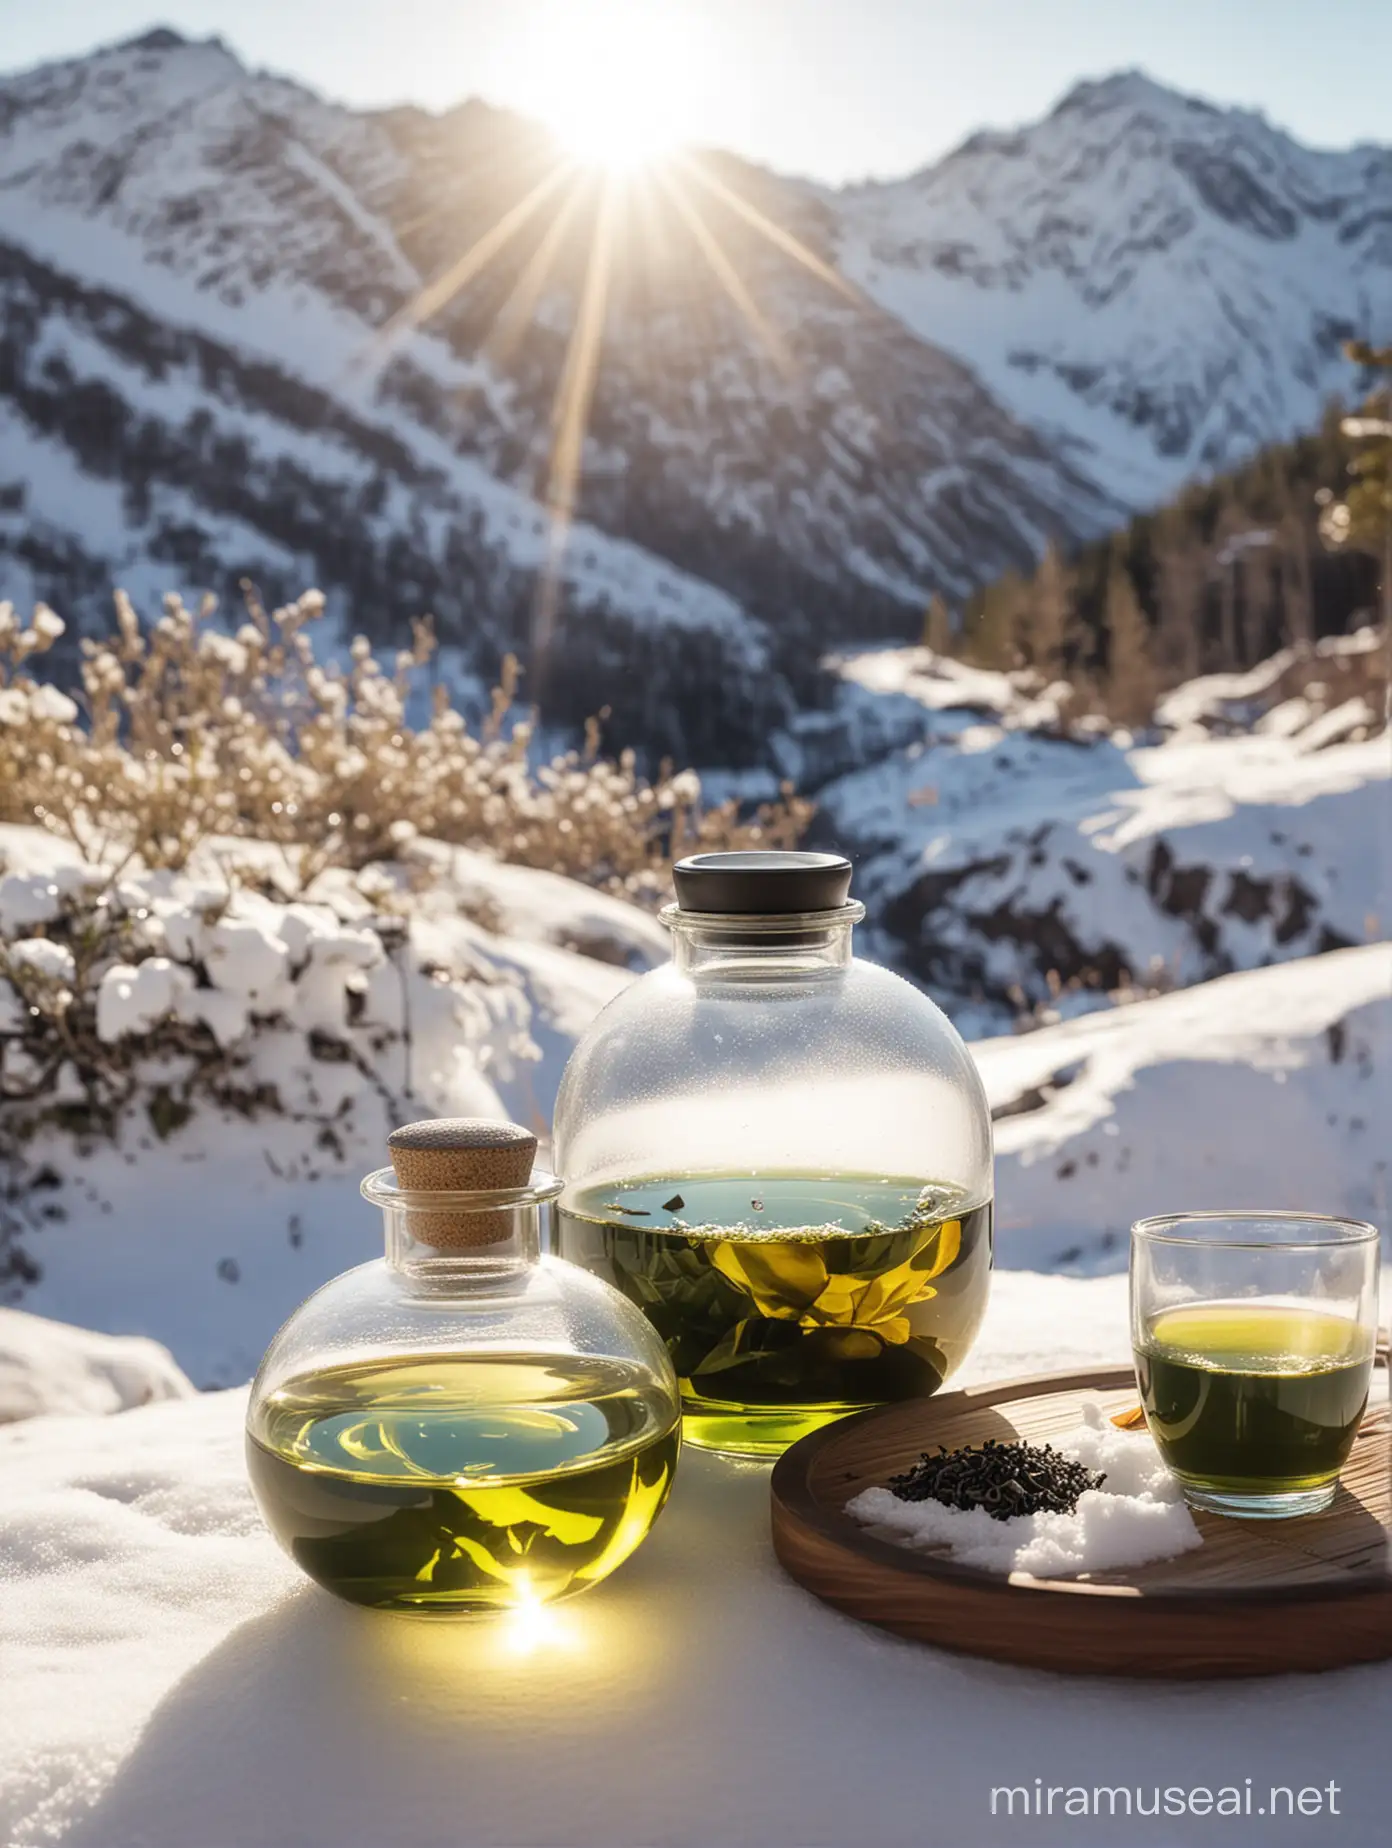 Aromatherapy Bottle Bathed in Sunlight on Snowy Mountain with Hot Green Tea Cup